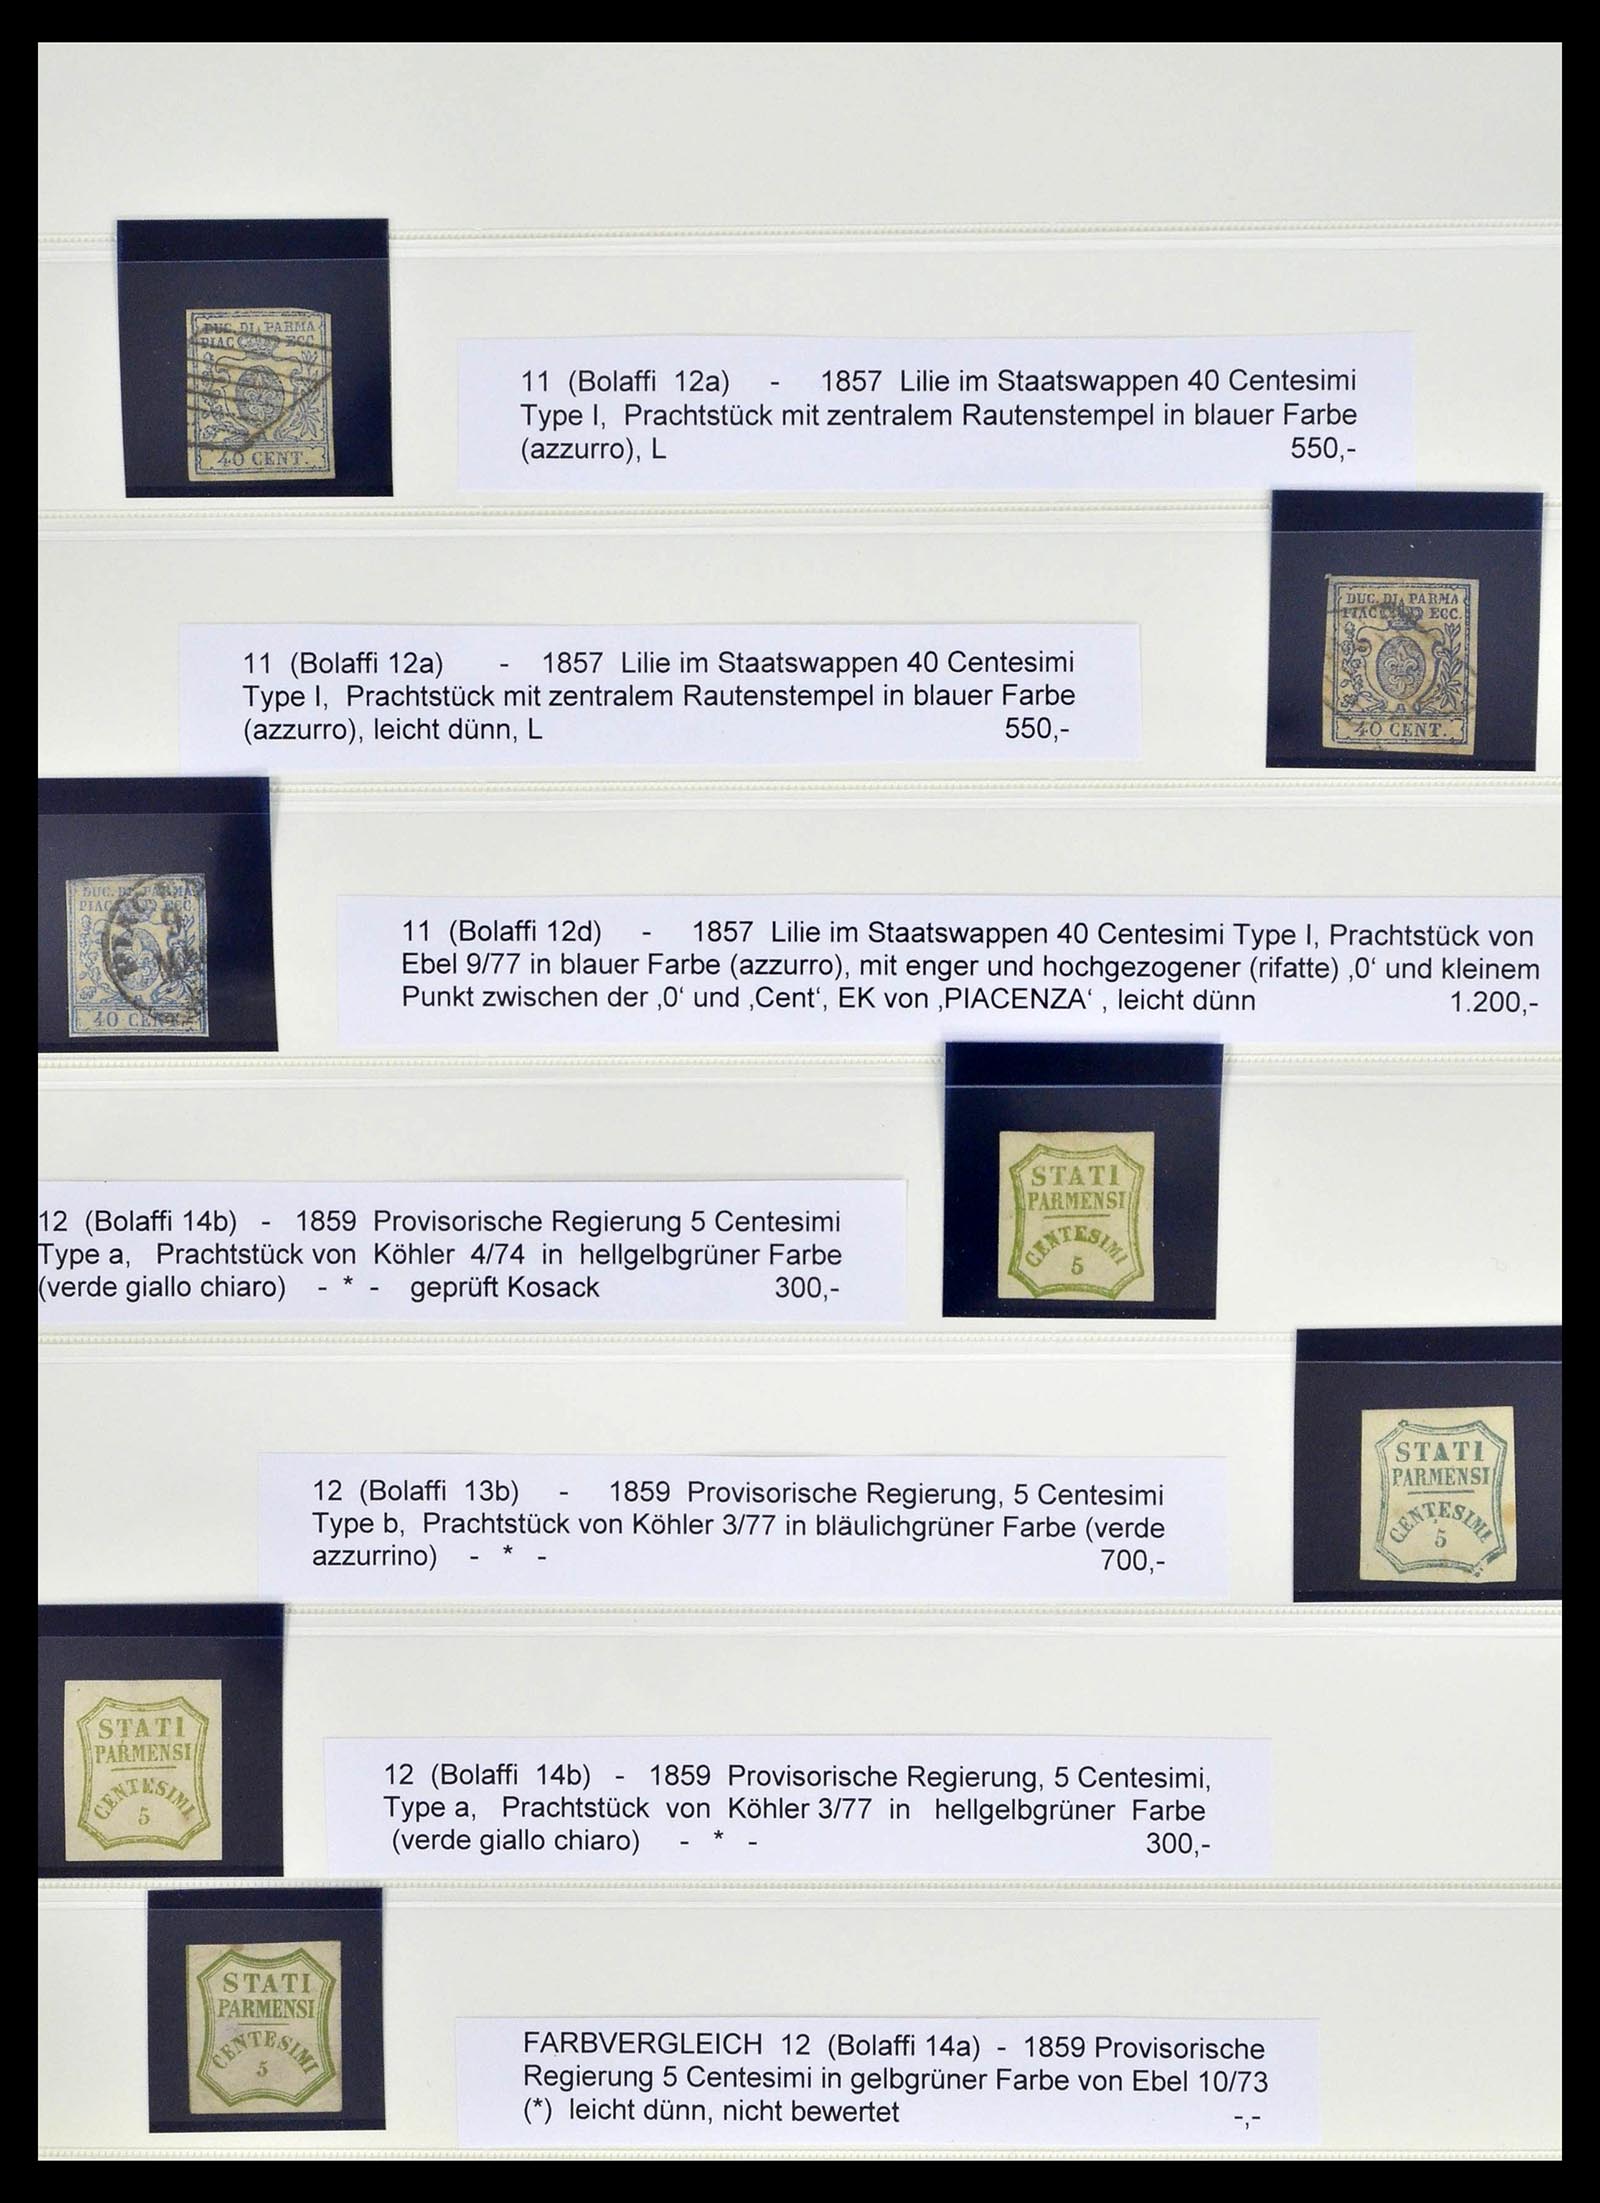 39203 0017 - Stamp collection 39203 Parma 1806-1859.